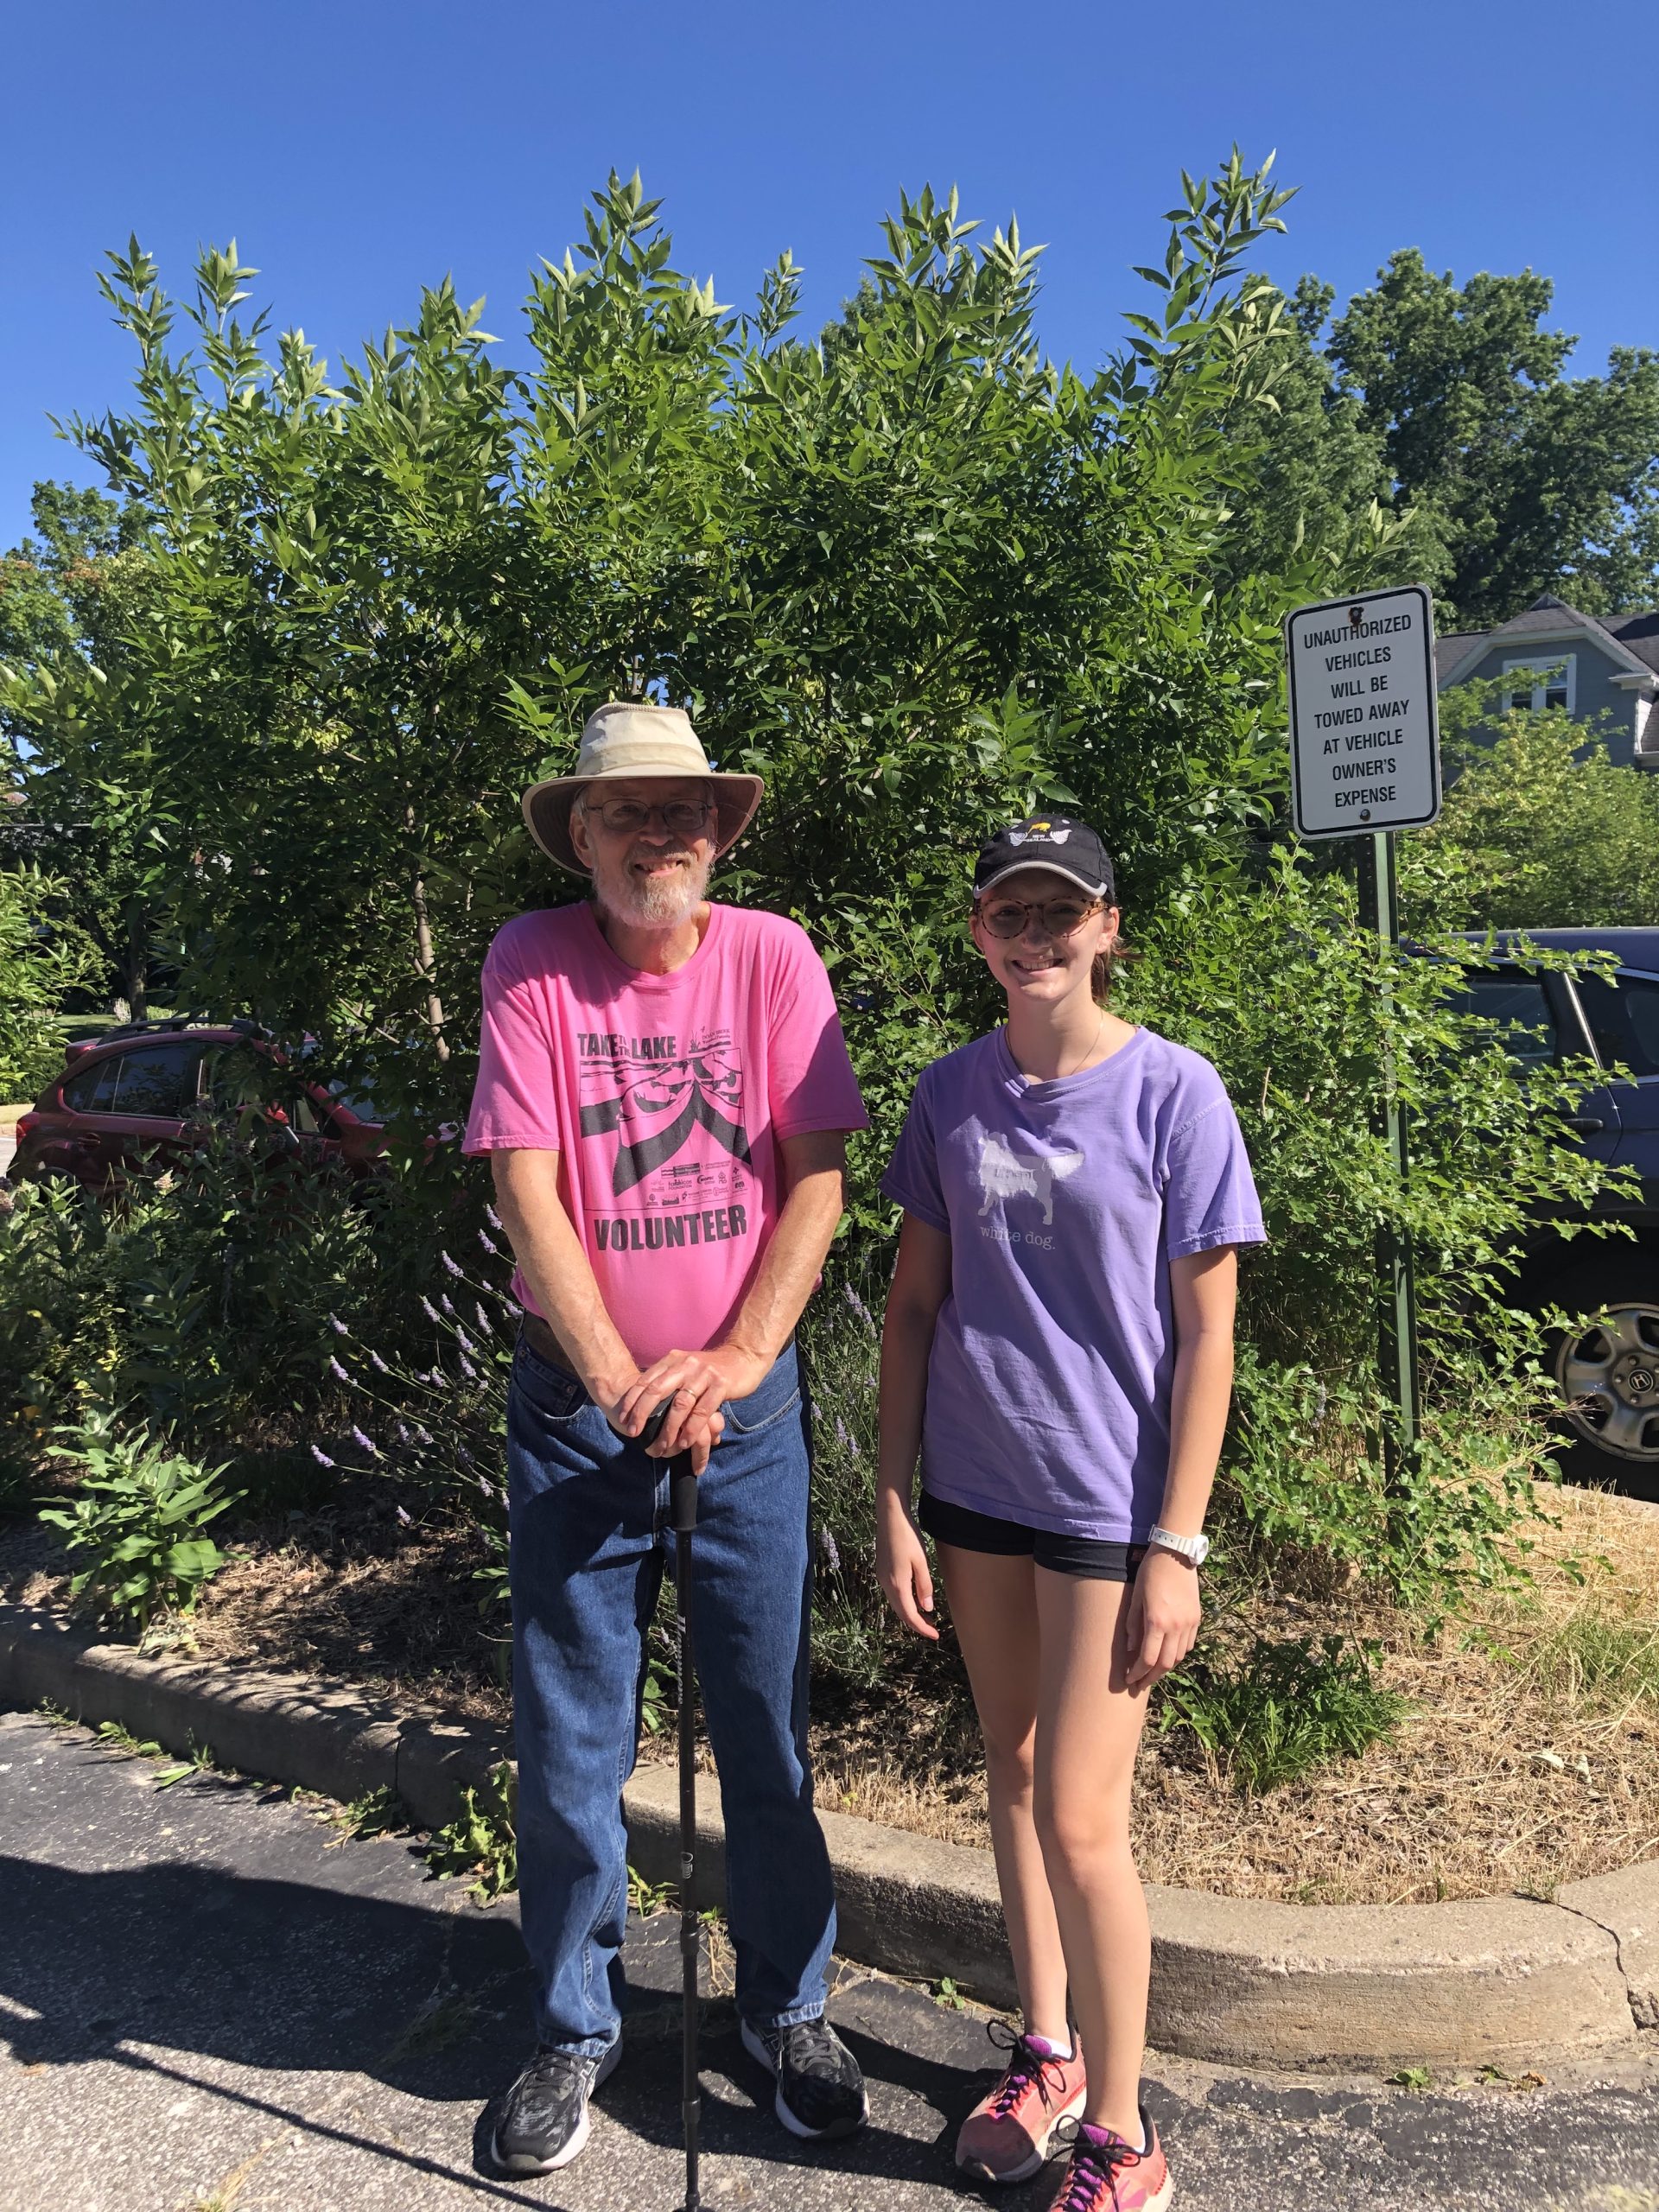 Sydney Knight and John Reebel pose in front of a bush.